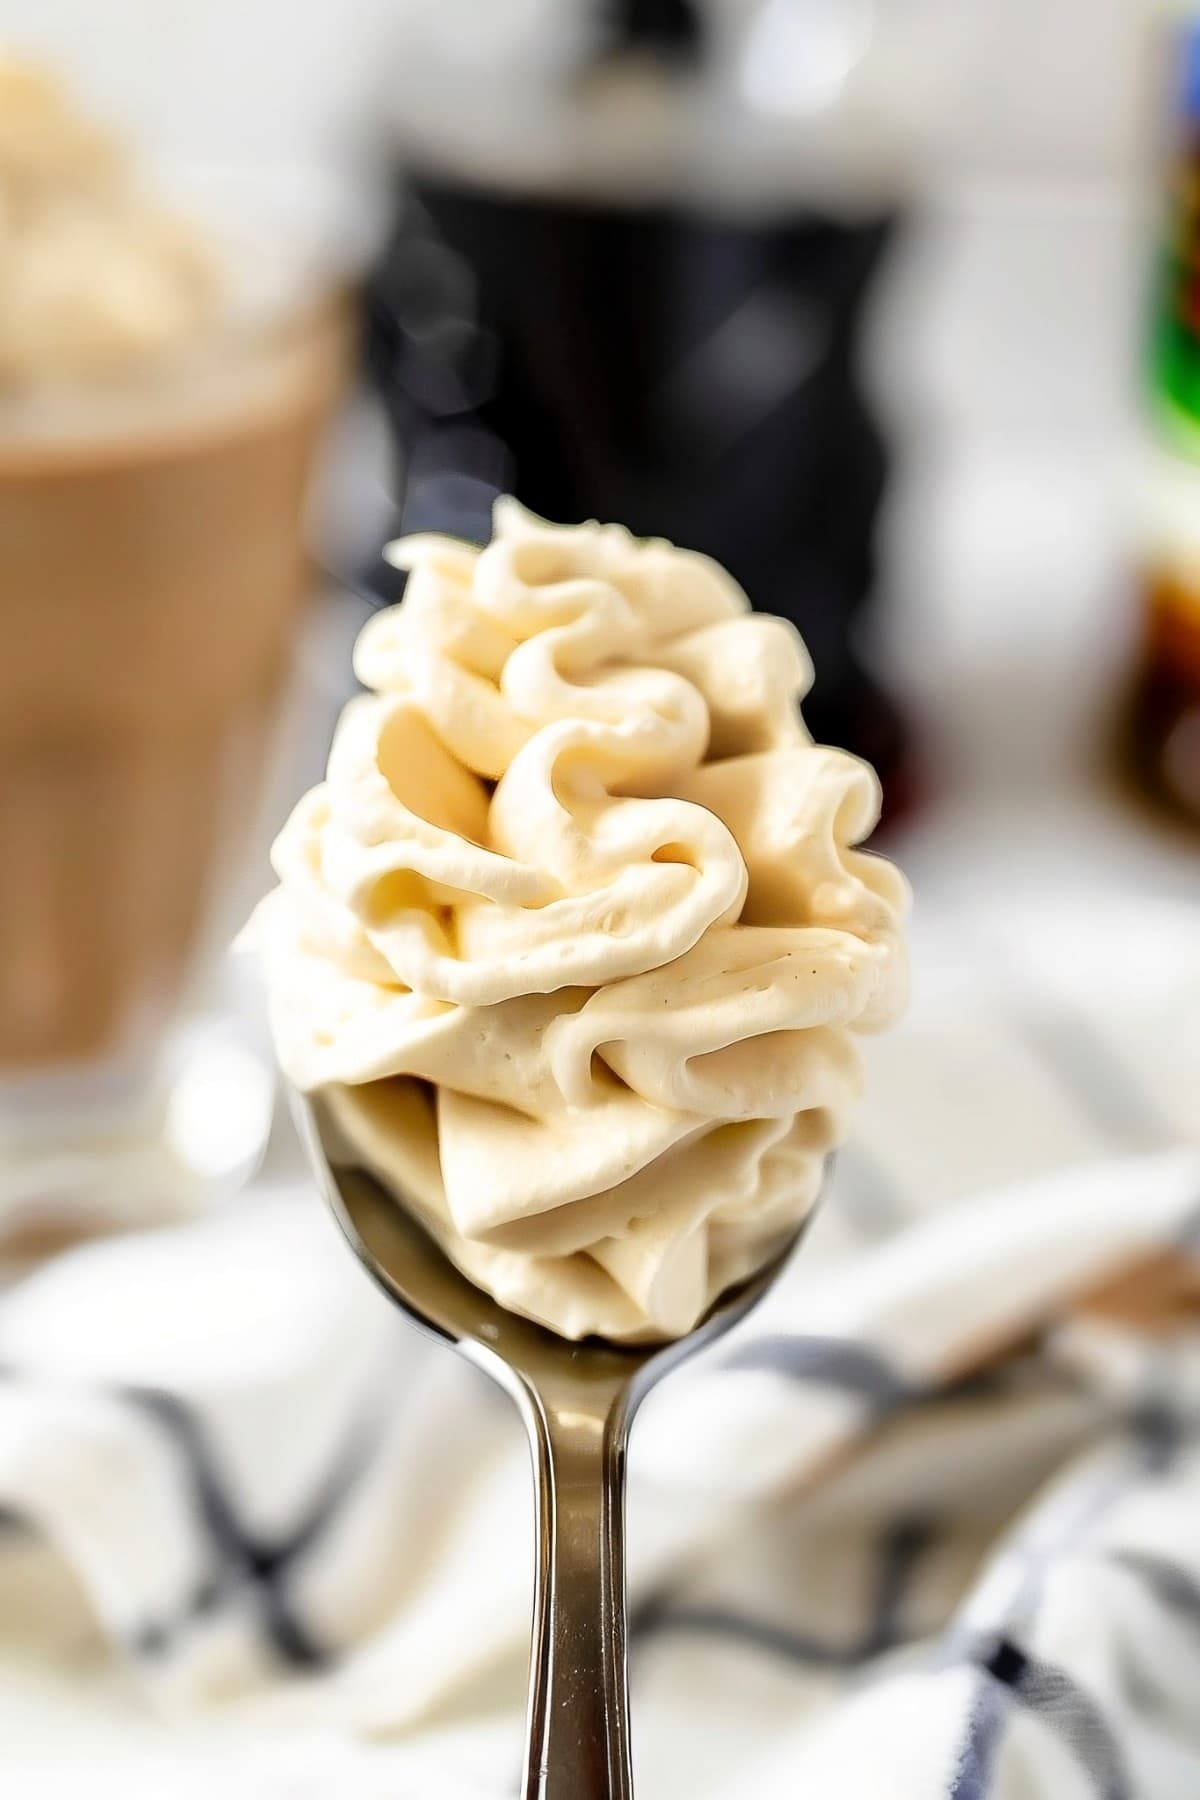 A dollop of creamy and silky Kahlua whipped cream in a spoon